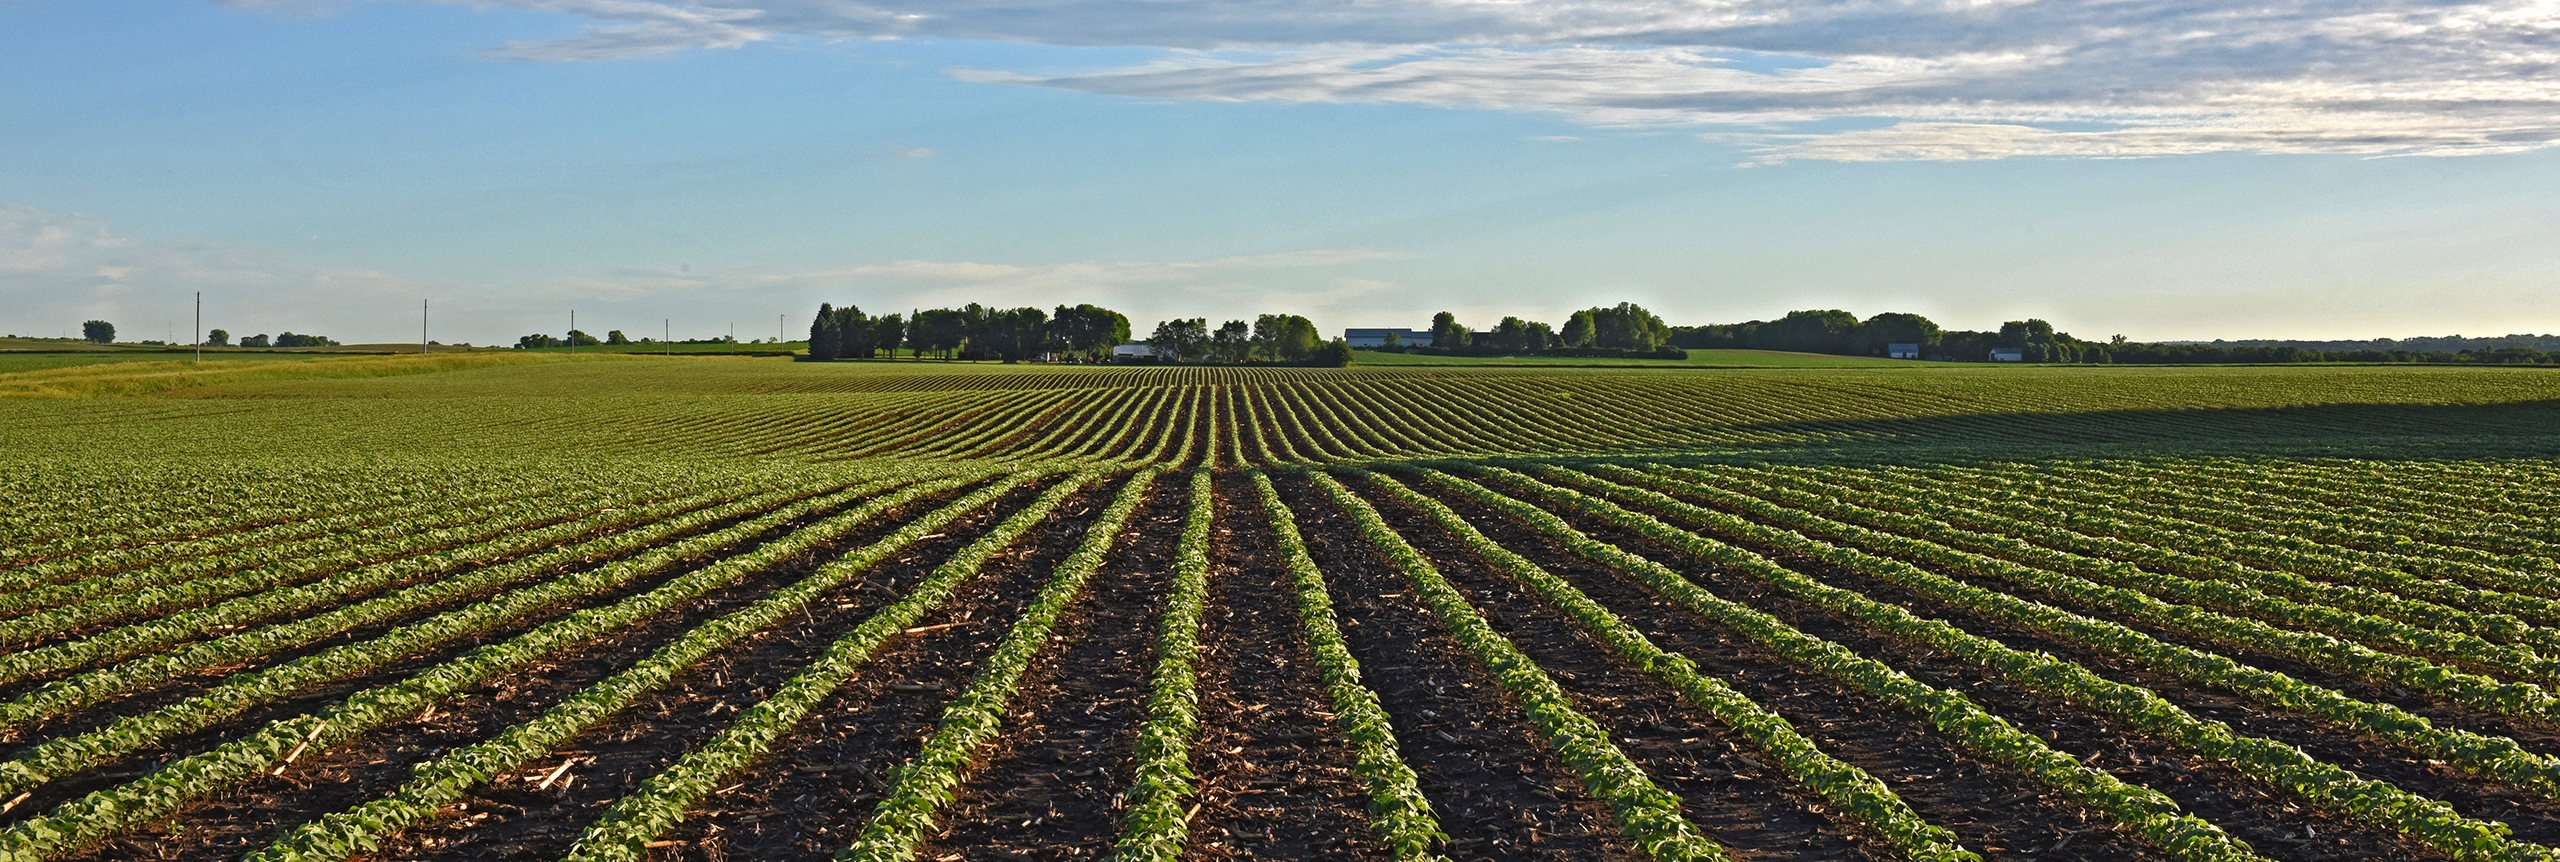 Field of young soybean plants